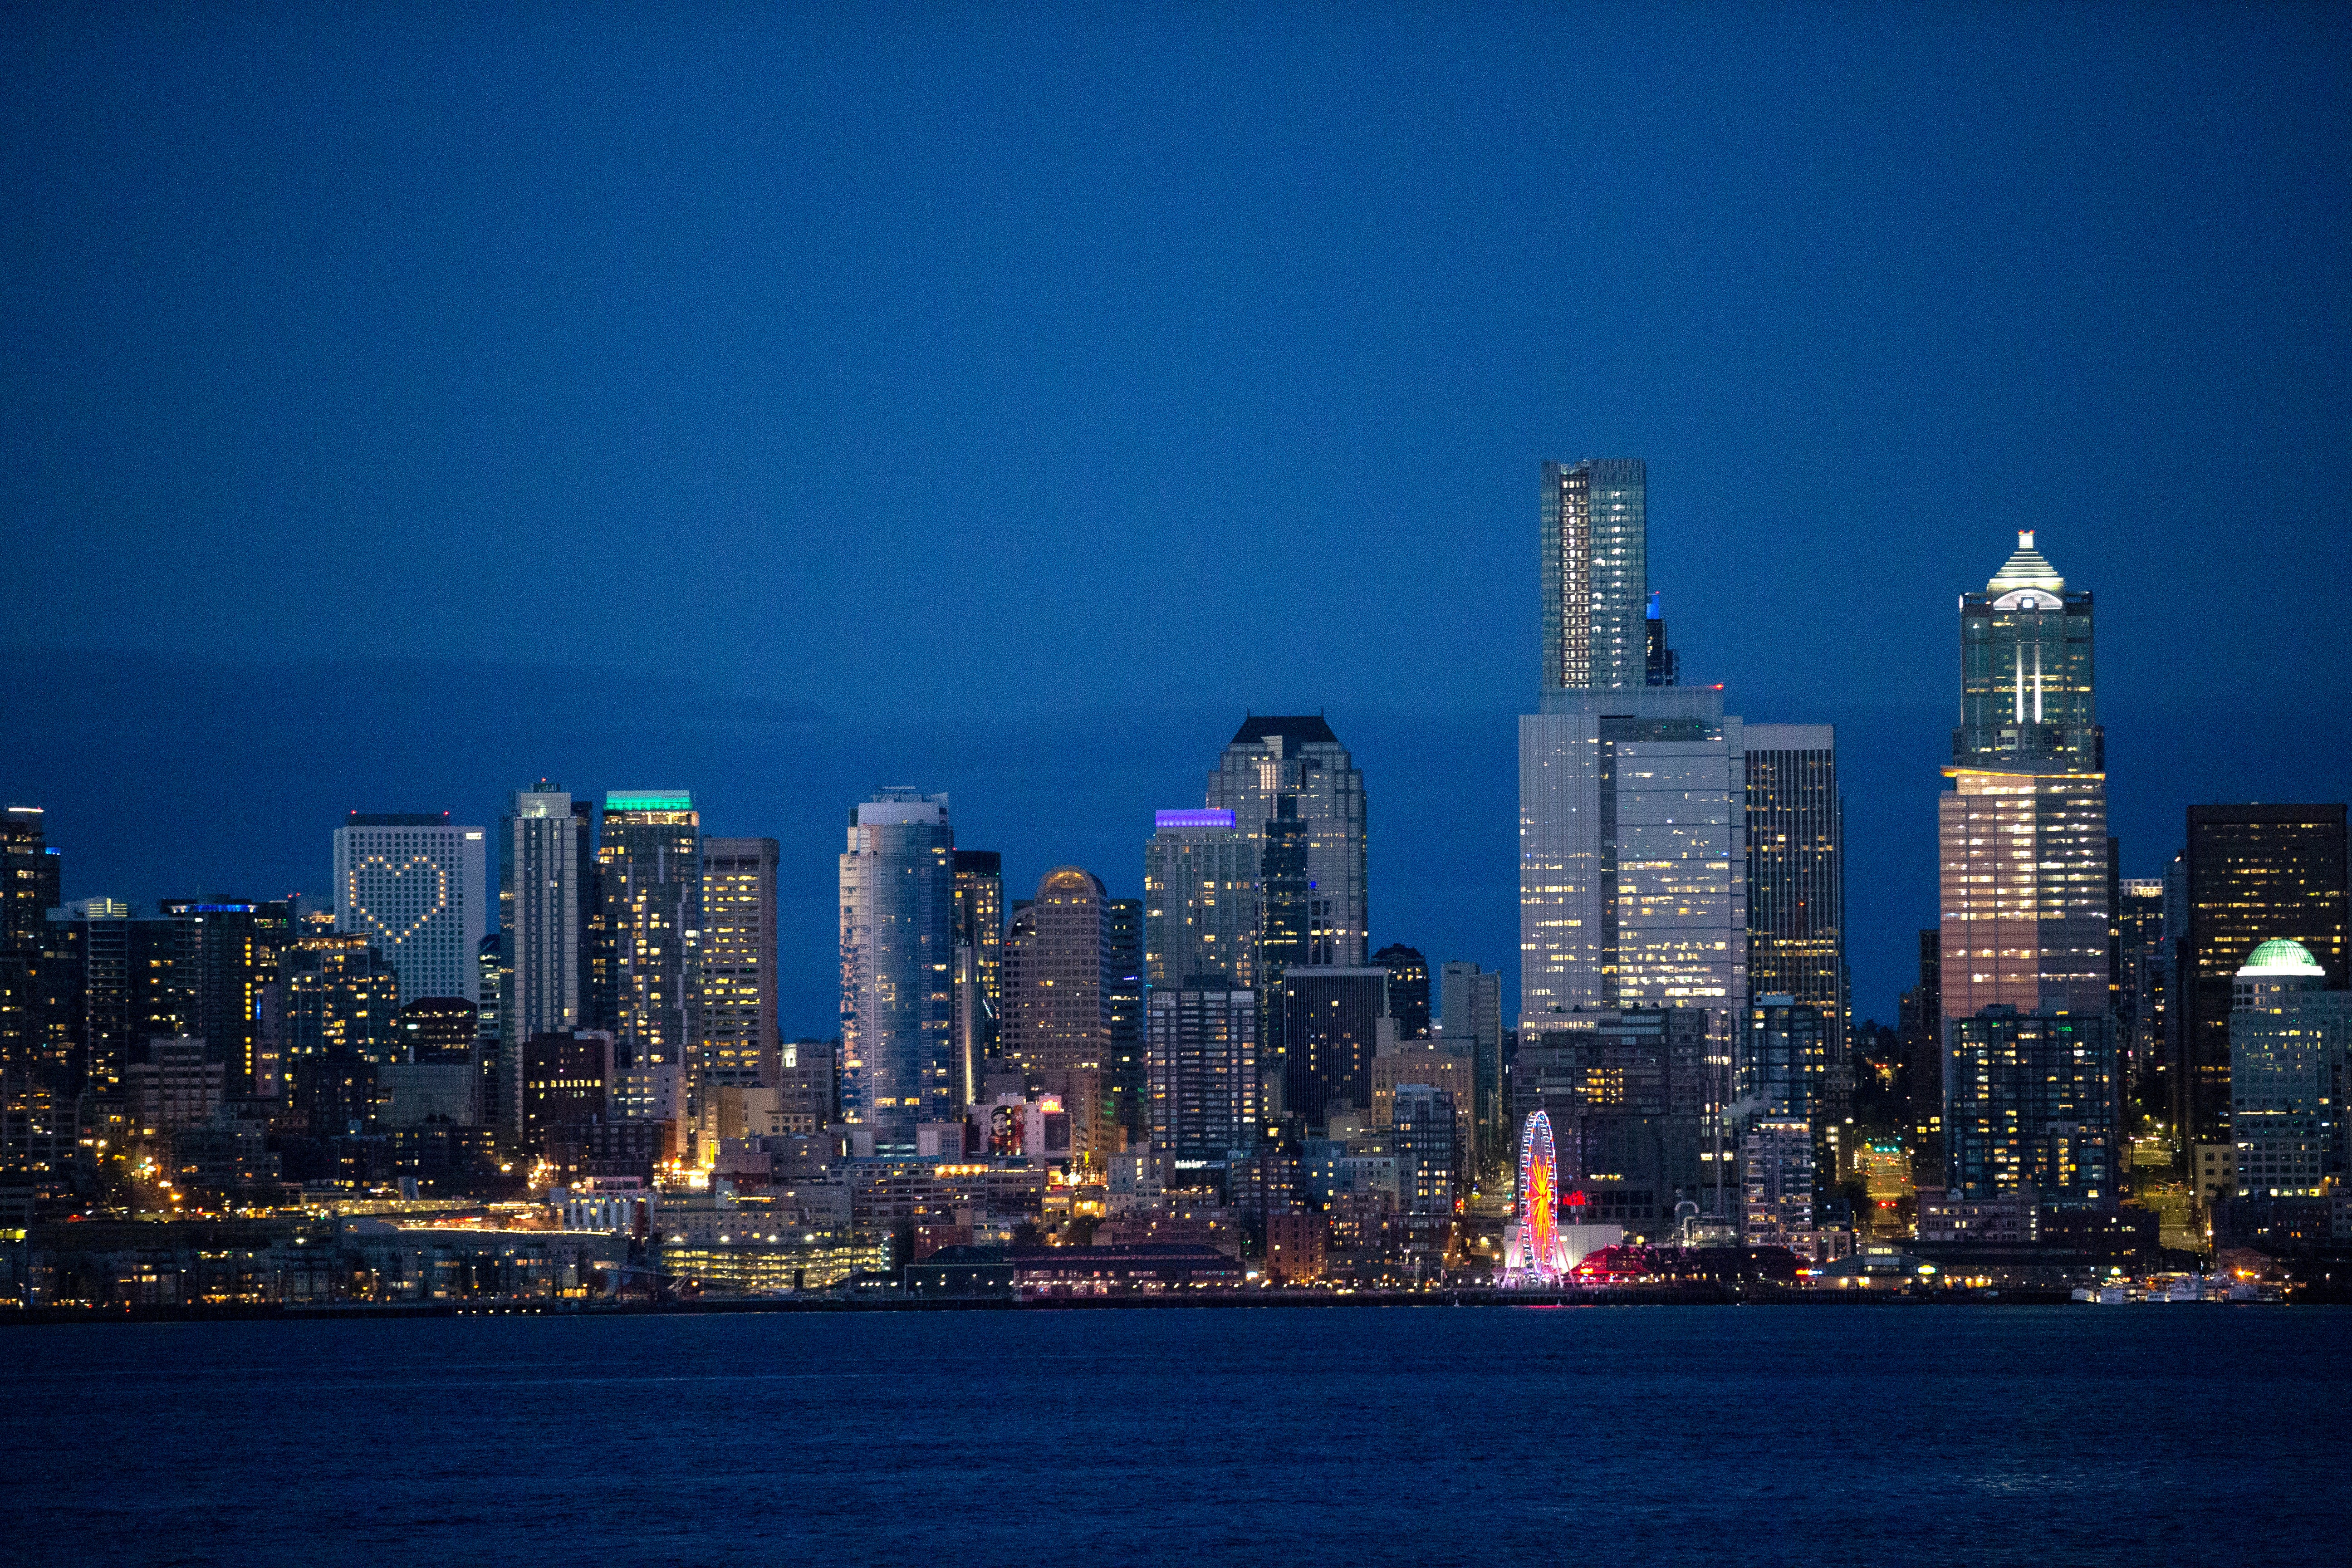 Seattle and the rest of Washington are among the most welcoming places to refugees in the US